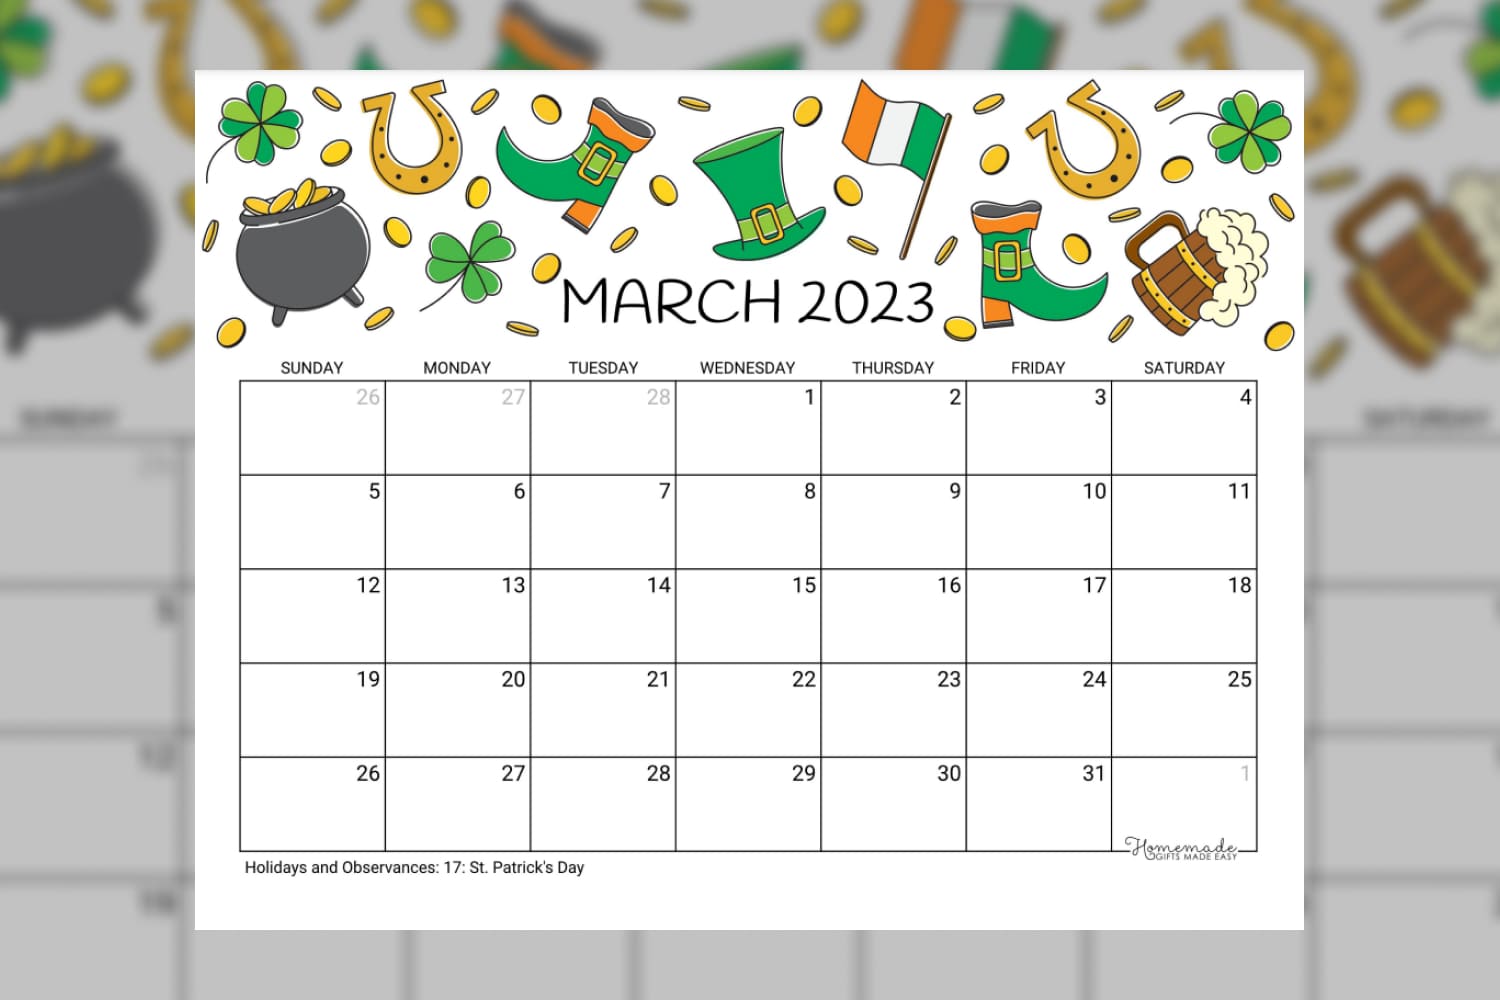 March Calendar in a green and gold color scheme with illustrations of shamrocks, leprechauns, and festive elements.